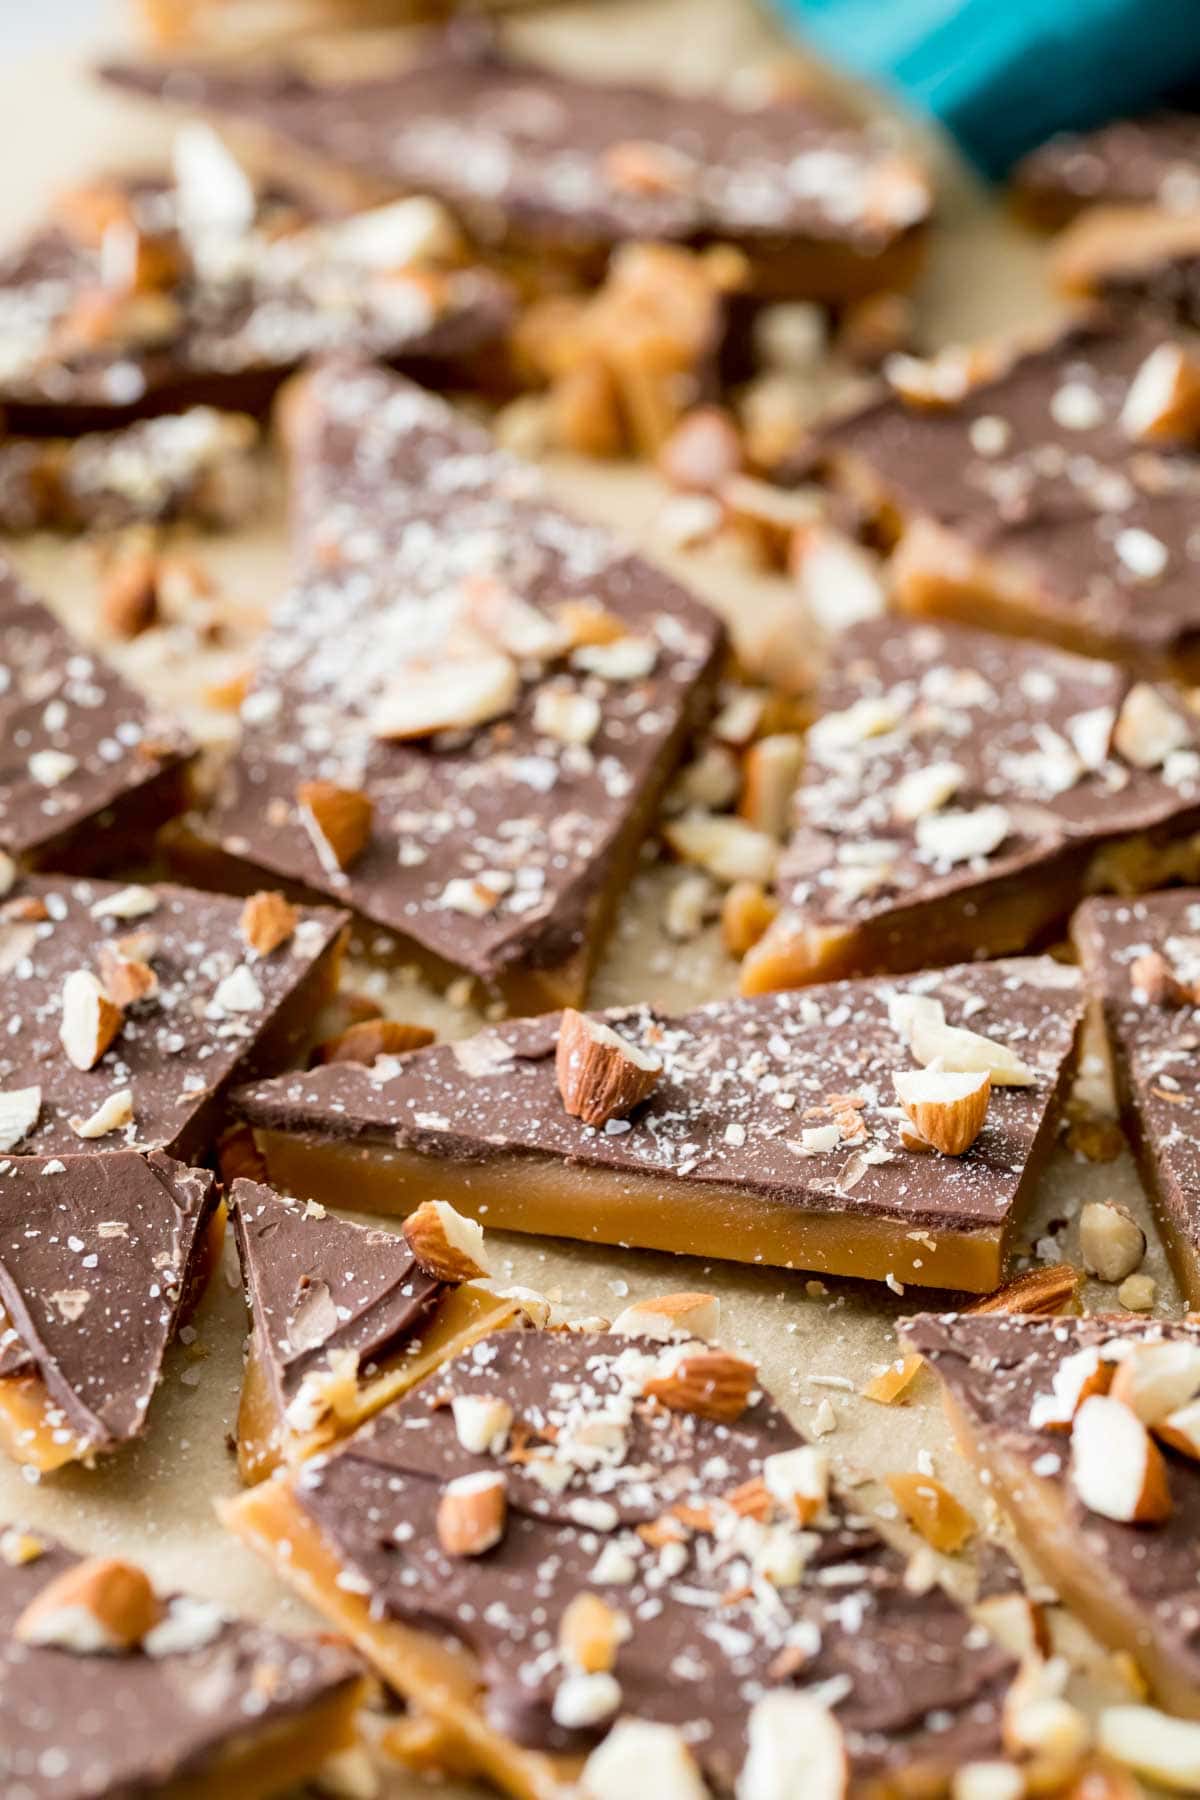 Chocolate and almond covered toffee made from a homemade toffee recipe.